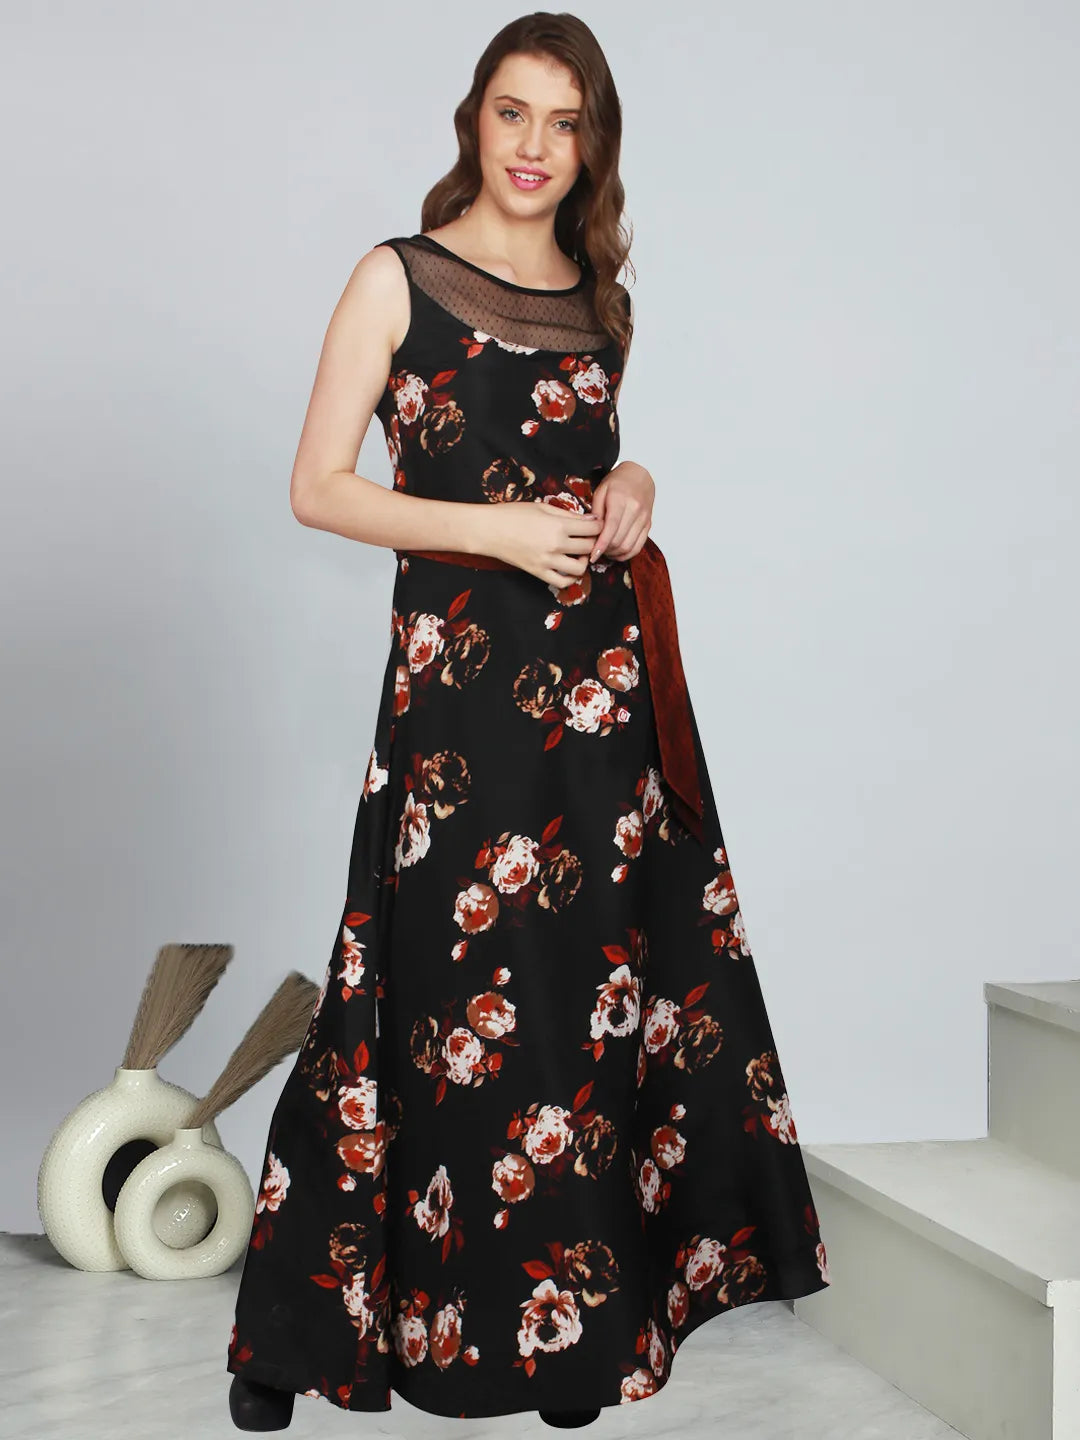 Floral Print Crepe Fit & Flare Gown Dress